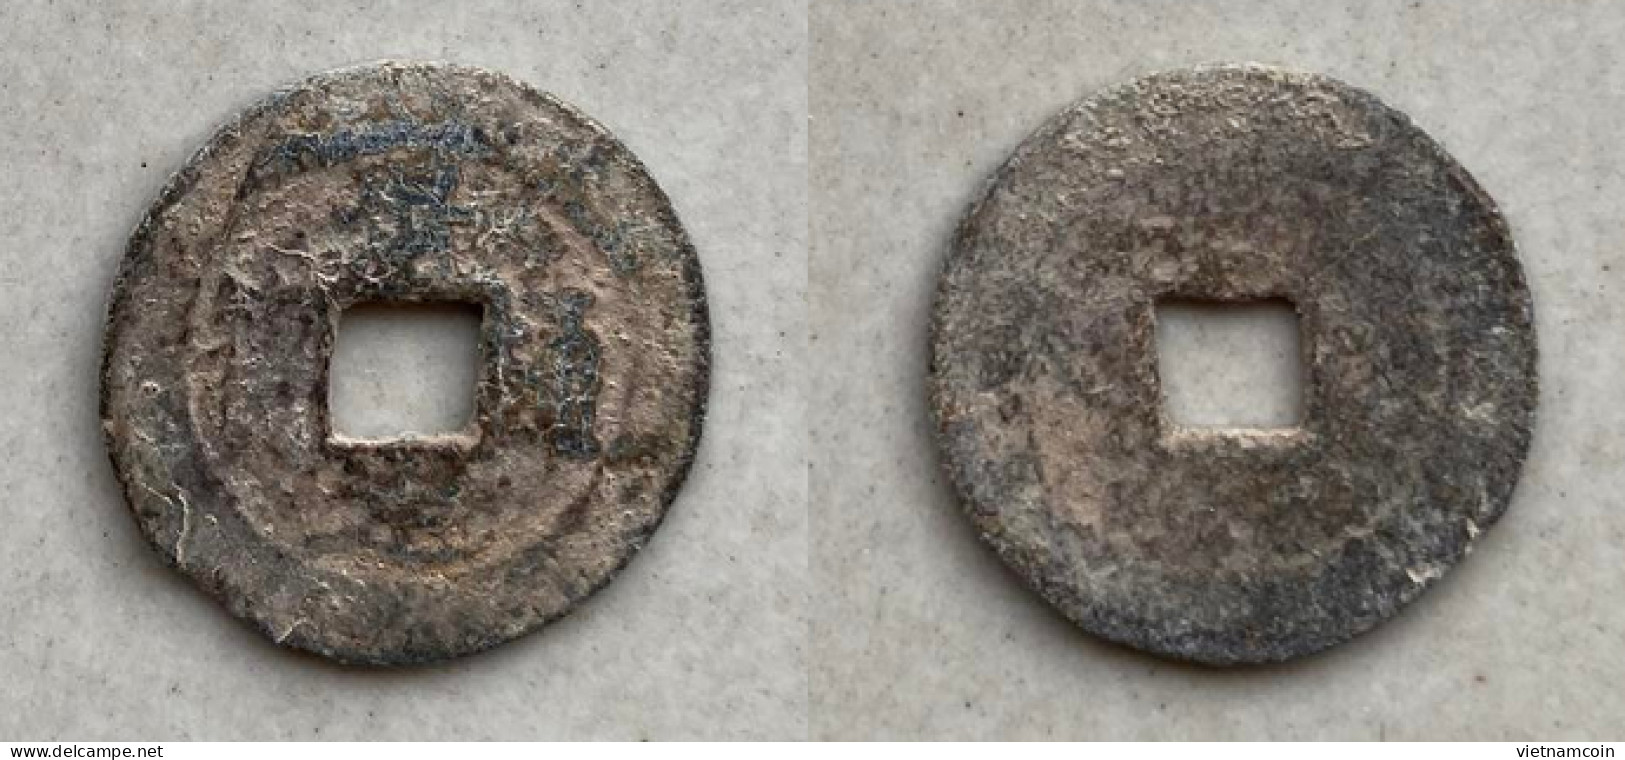 Ancient Annam Coin  Canh Dinh Thong Bao (zinc Coin) THE NGUYEN LORDS (1558-1778) - Viêt-Nam